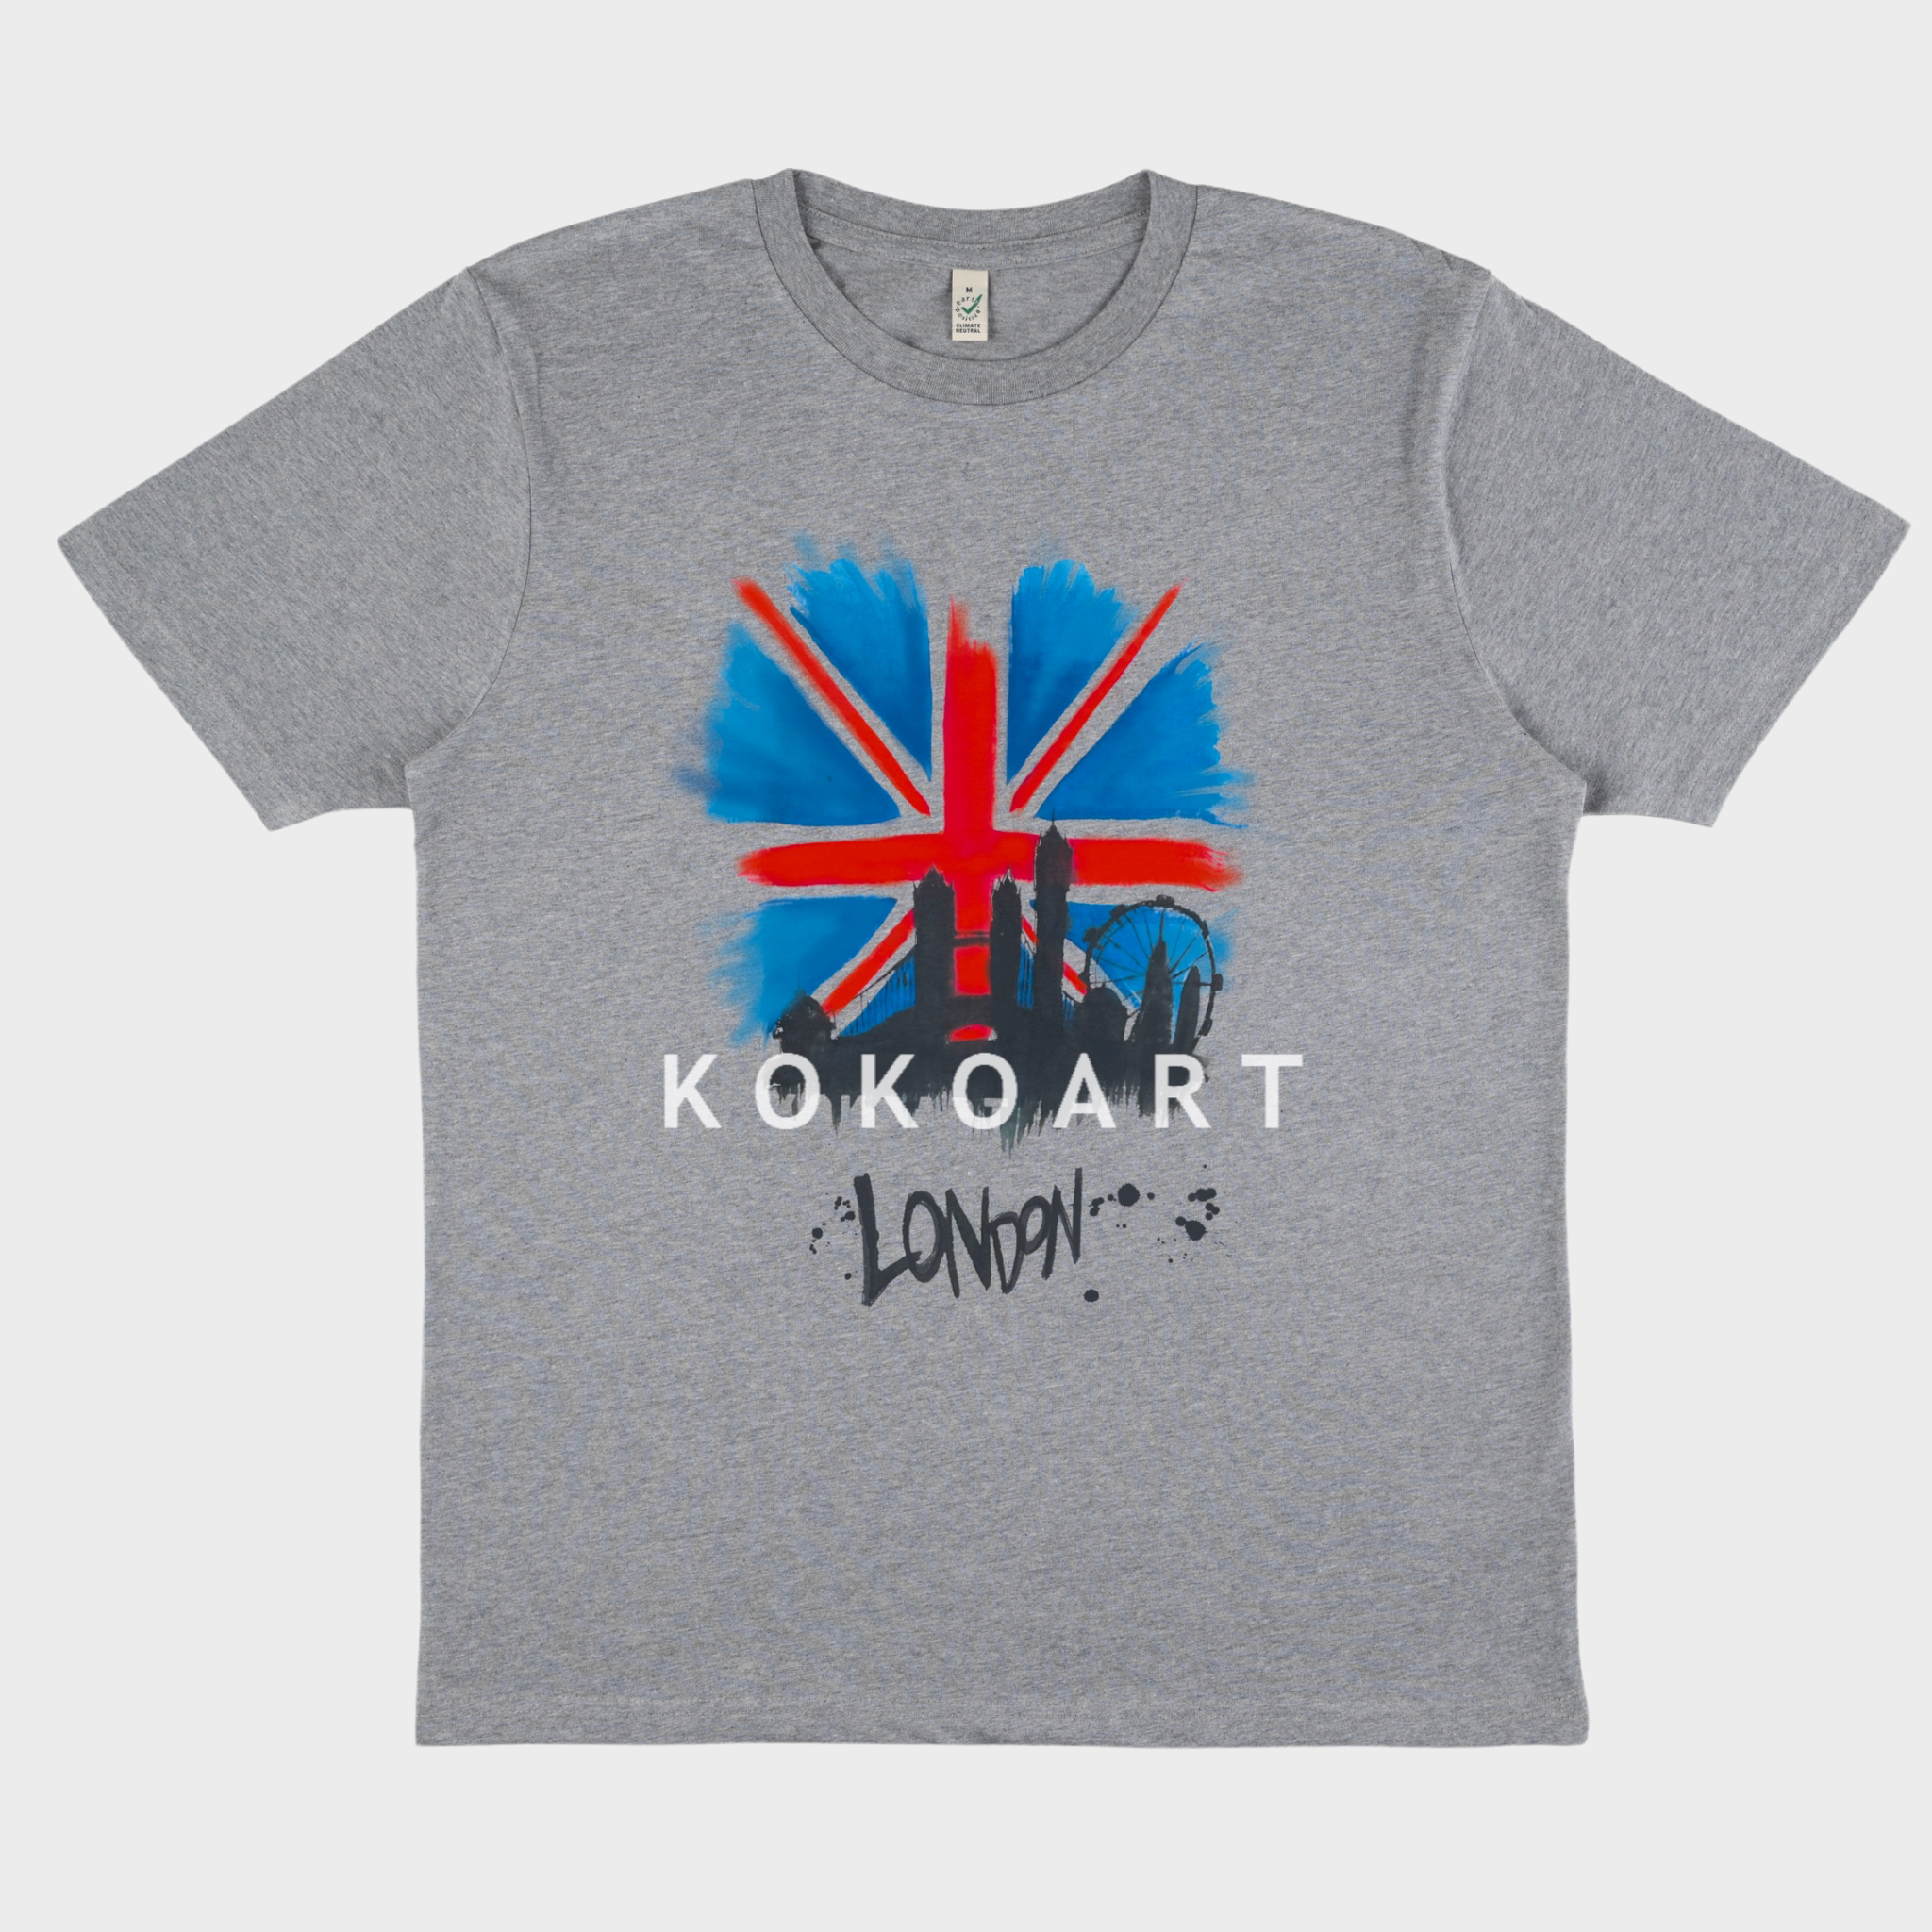 London - Hand painted Organic Cotton Clothing